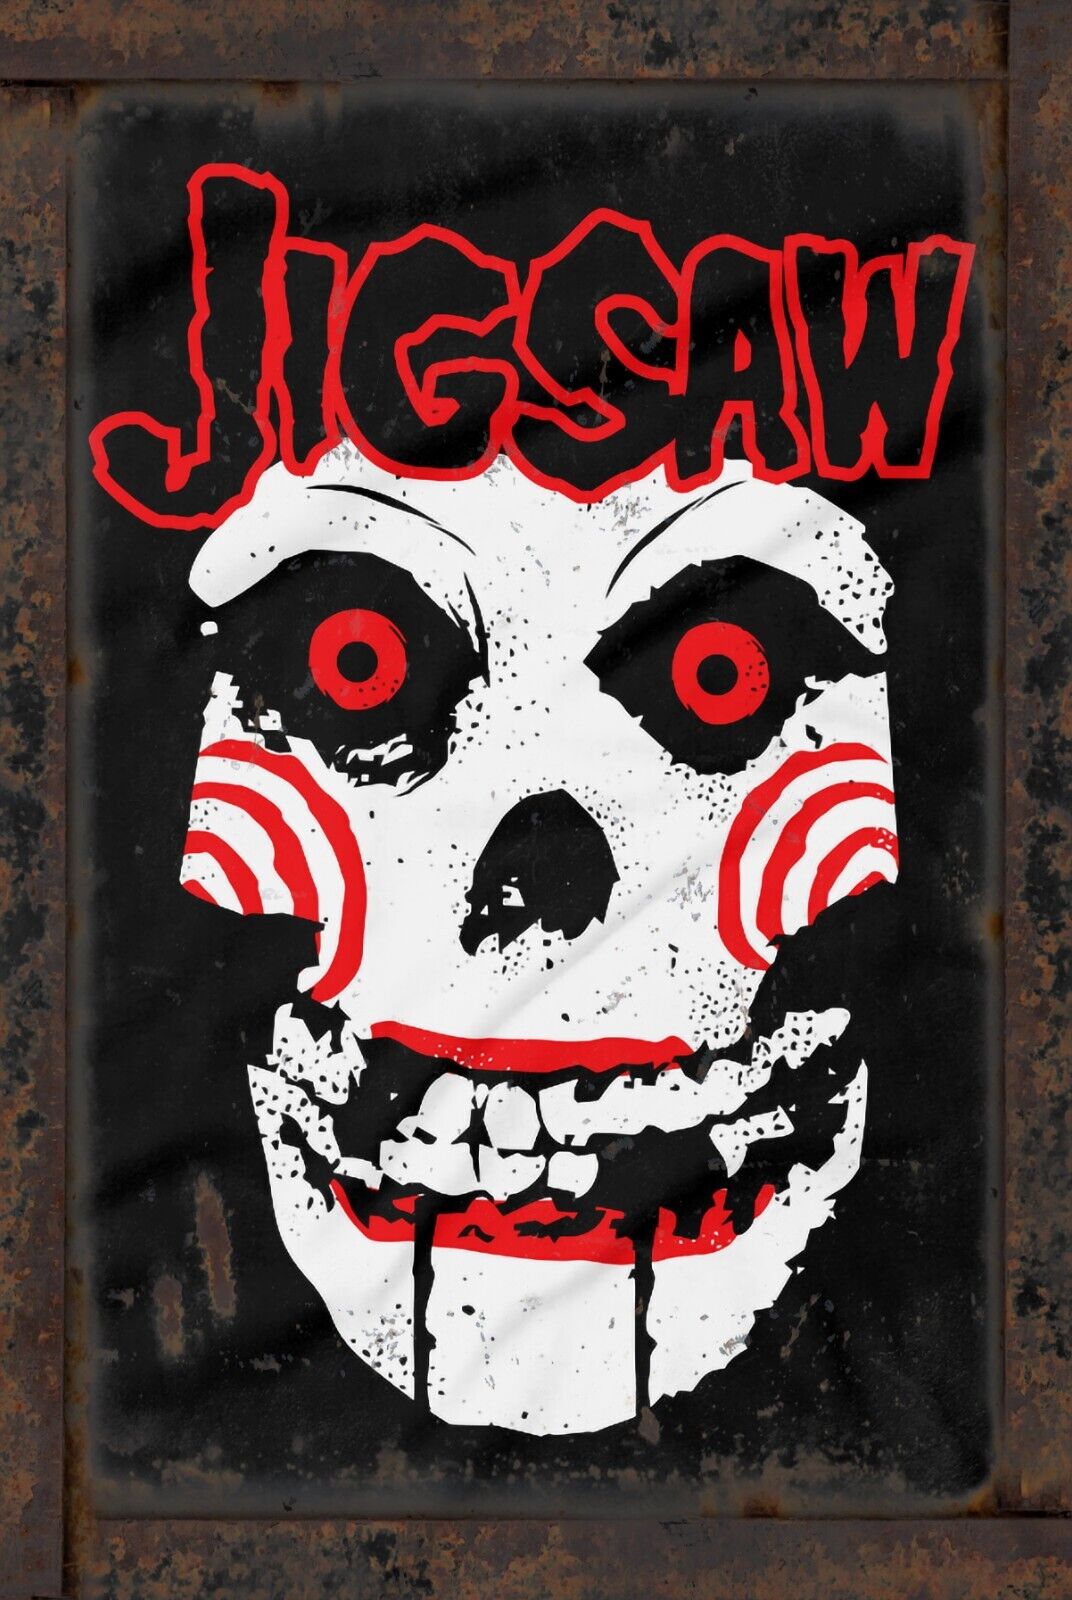 Jigsaw Saw (2004) 8x12 Rustic Vintage Style Tin Sign Metal Poster